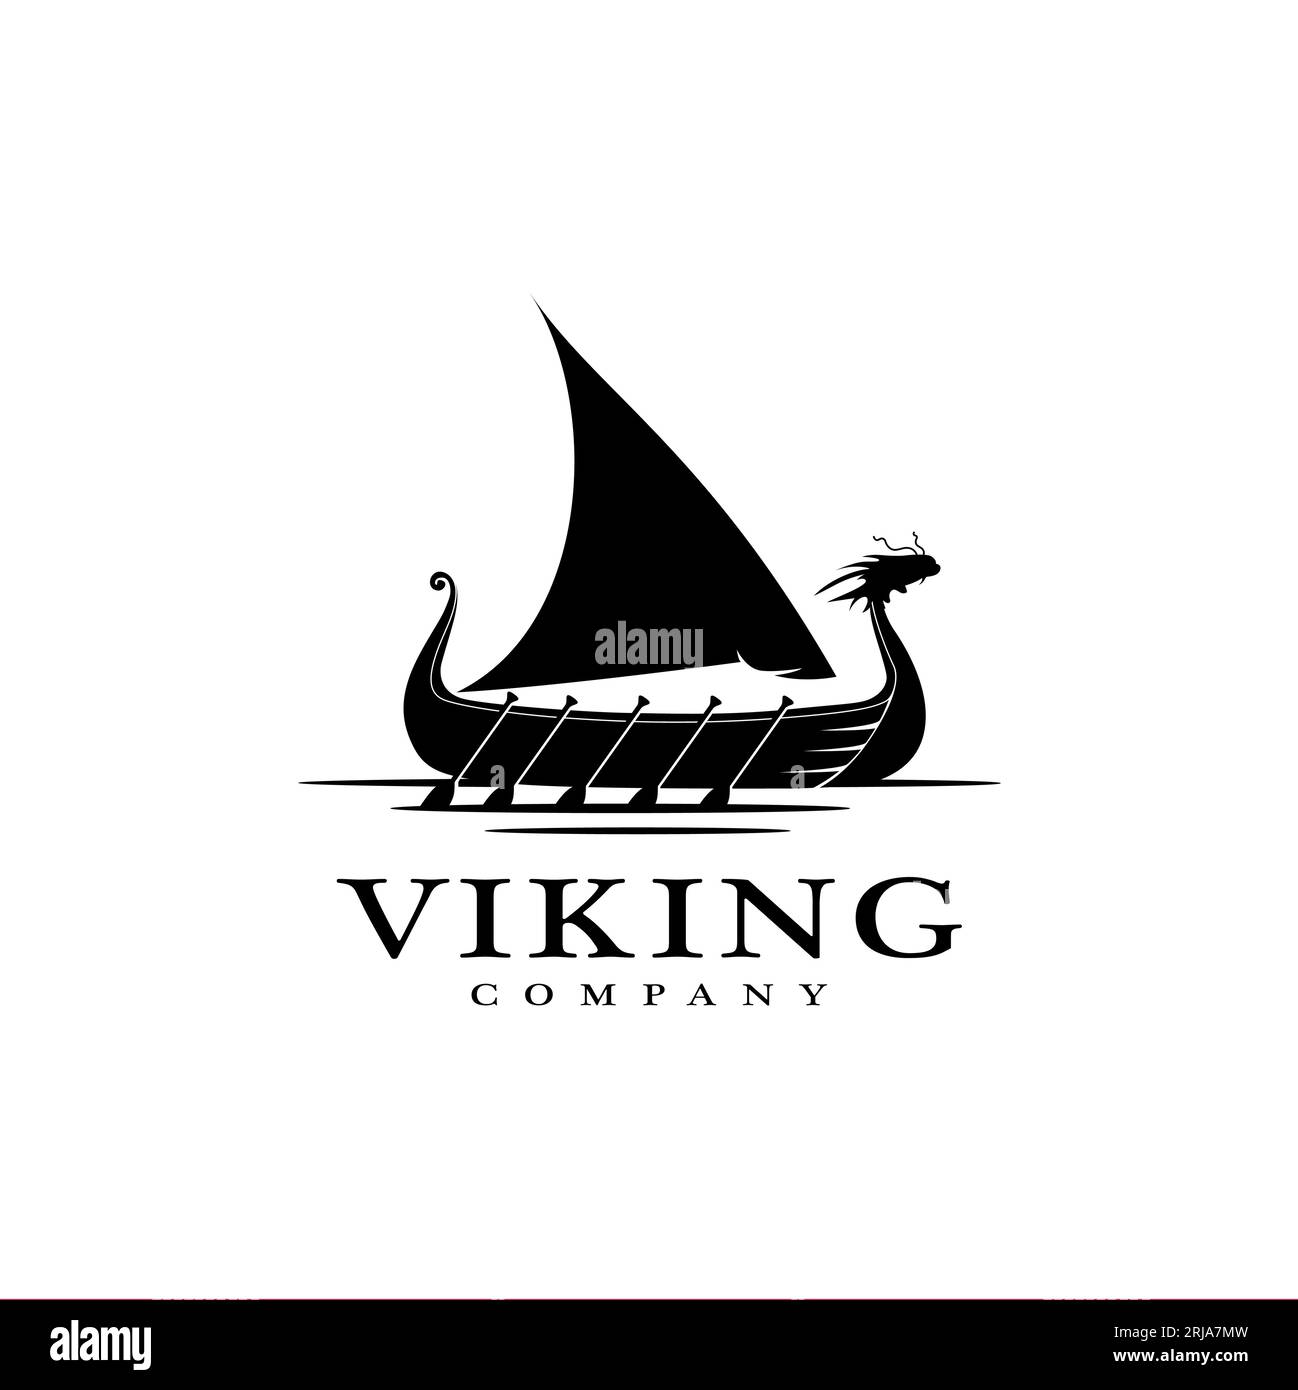 Vintage Viking Ship Boat Silhouette With Dragon Head Logo design Stock Vector